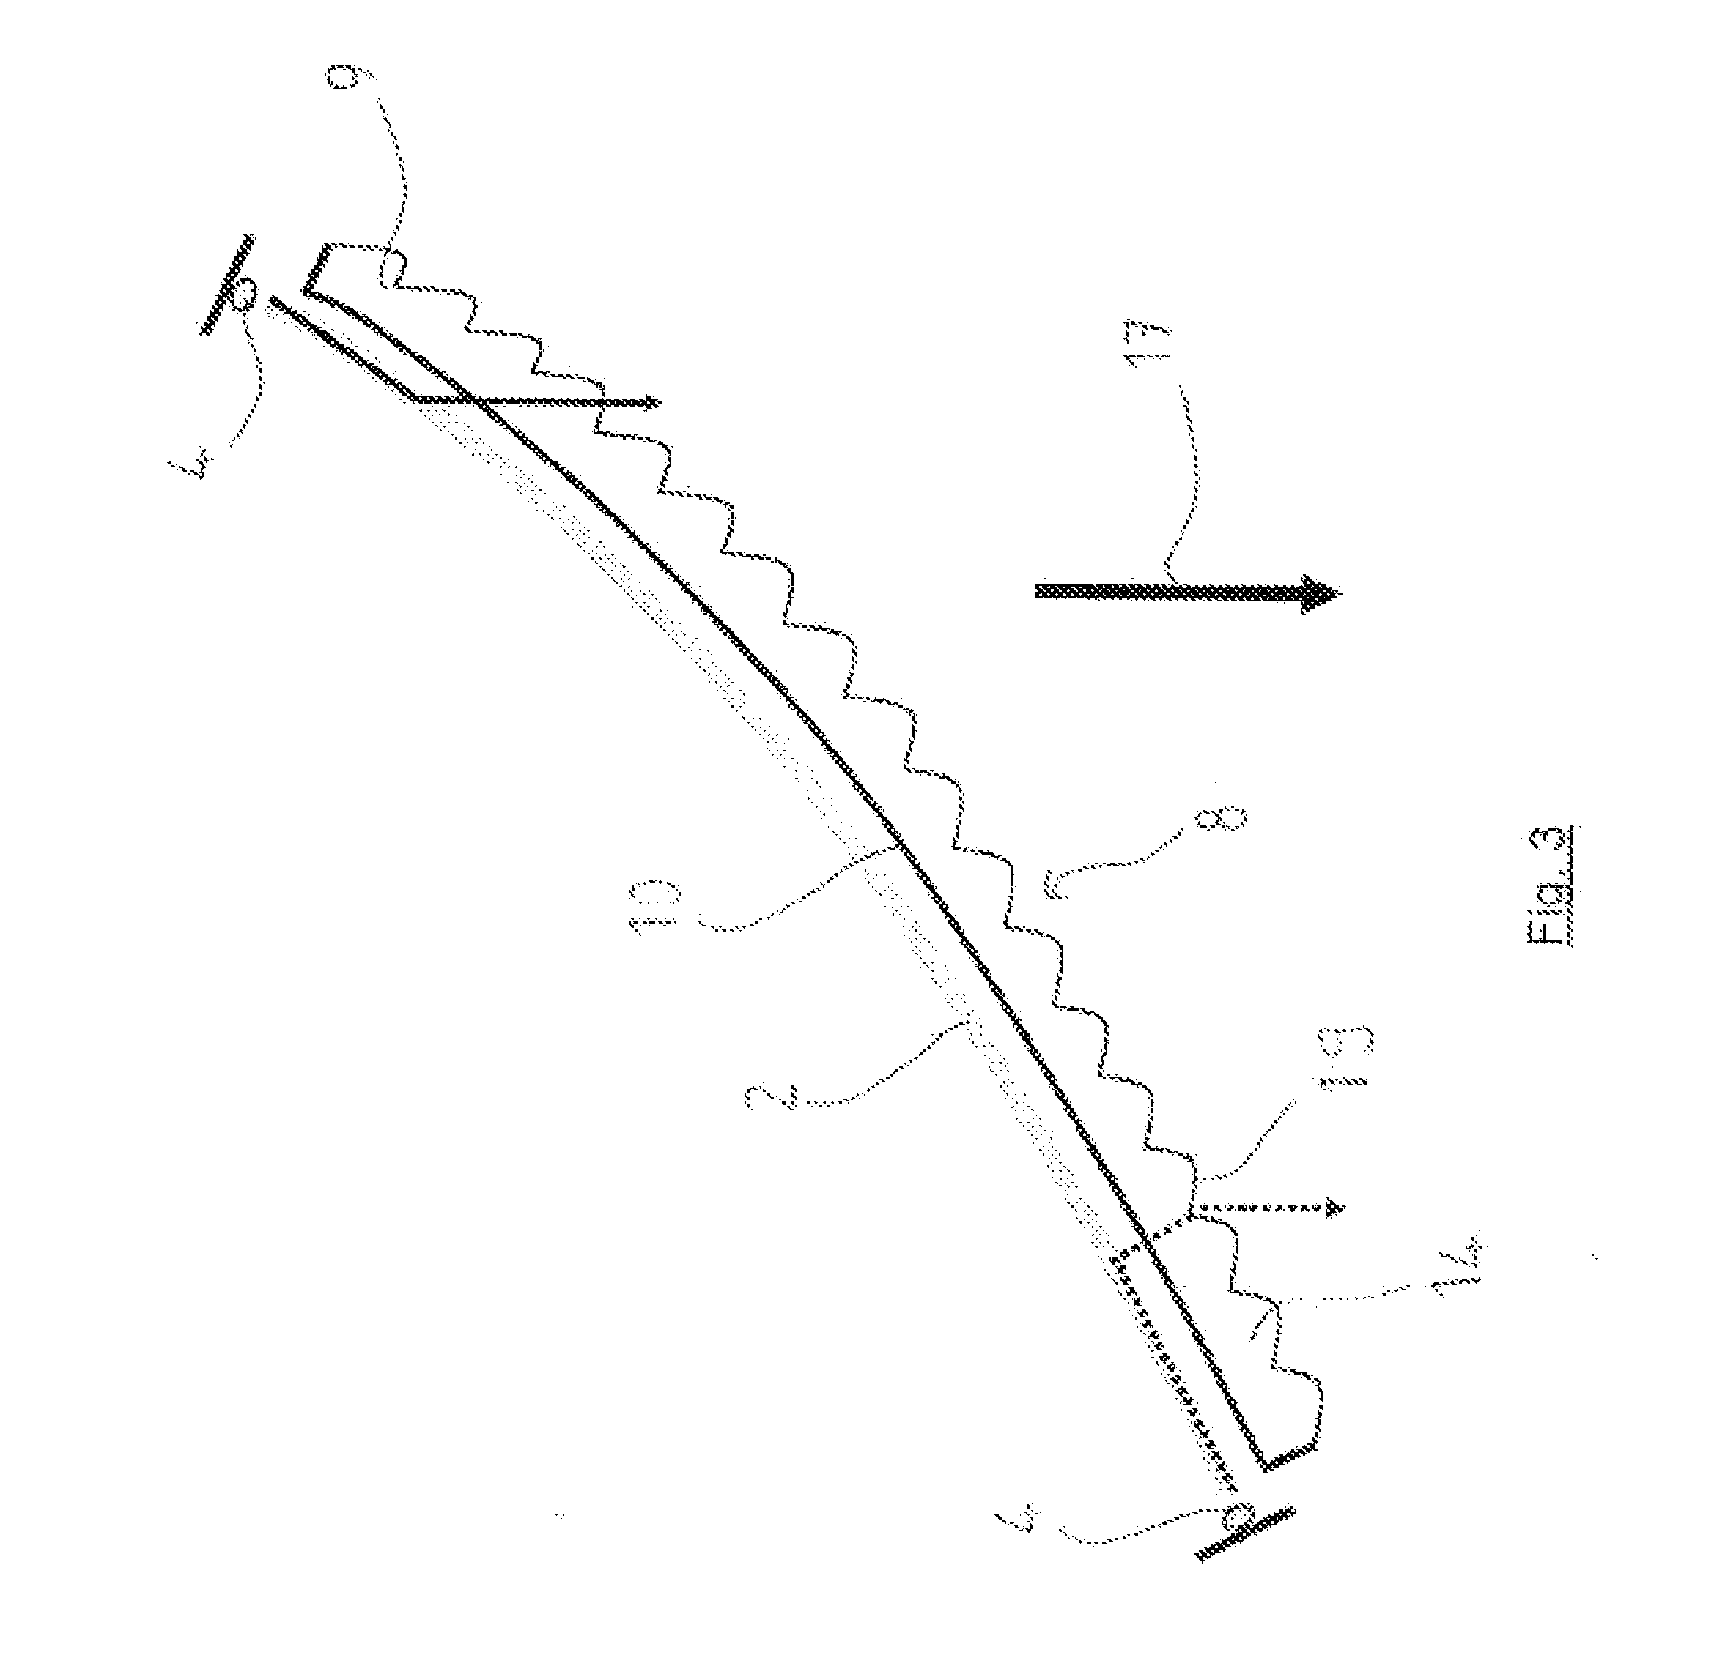 Optical device and signaling and/or lighting system